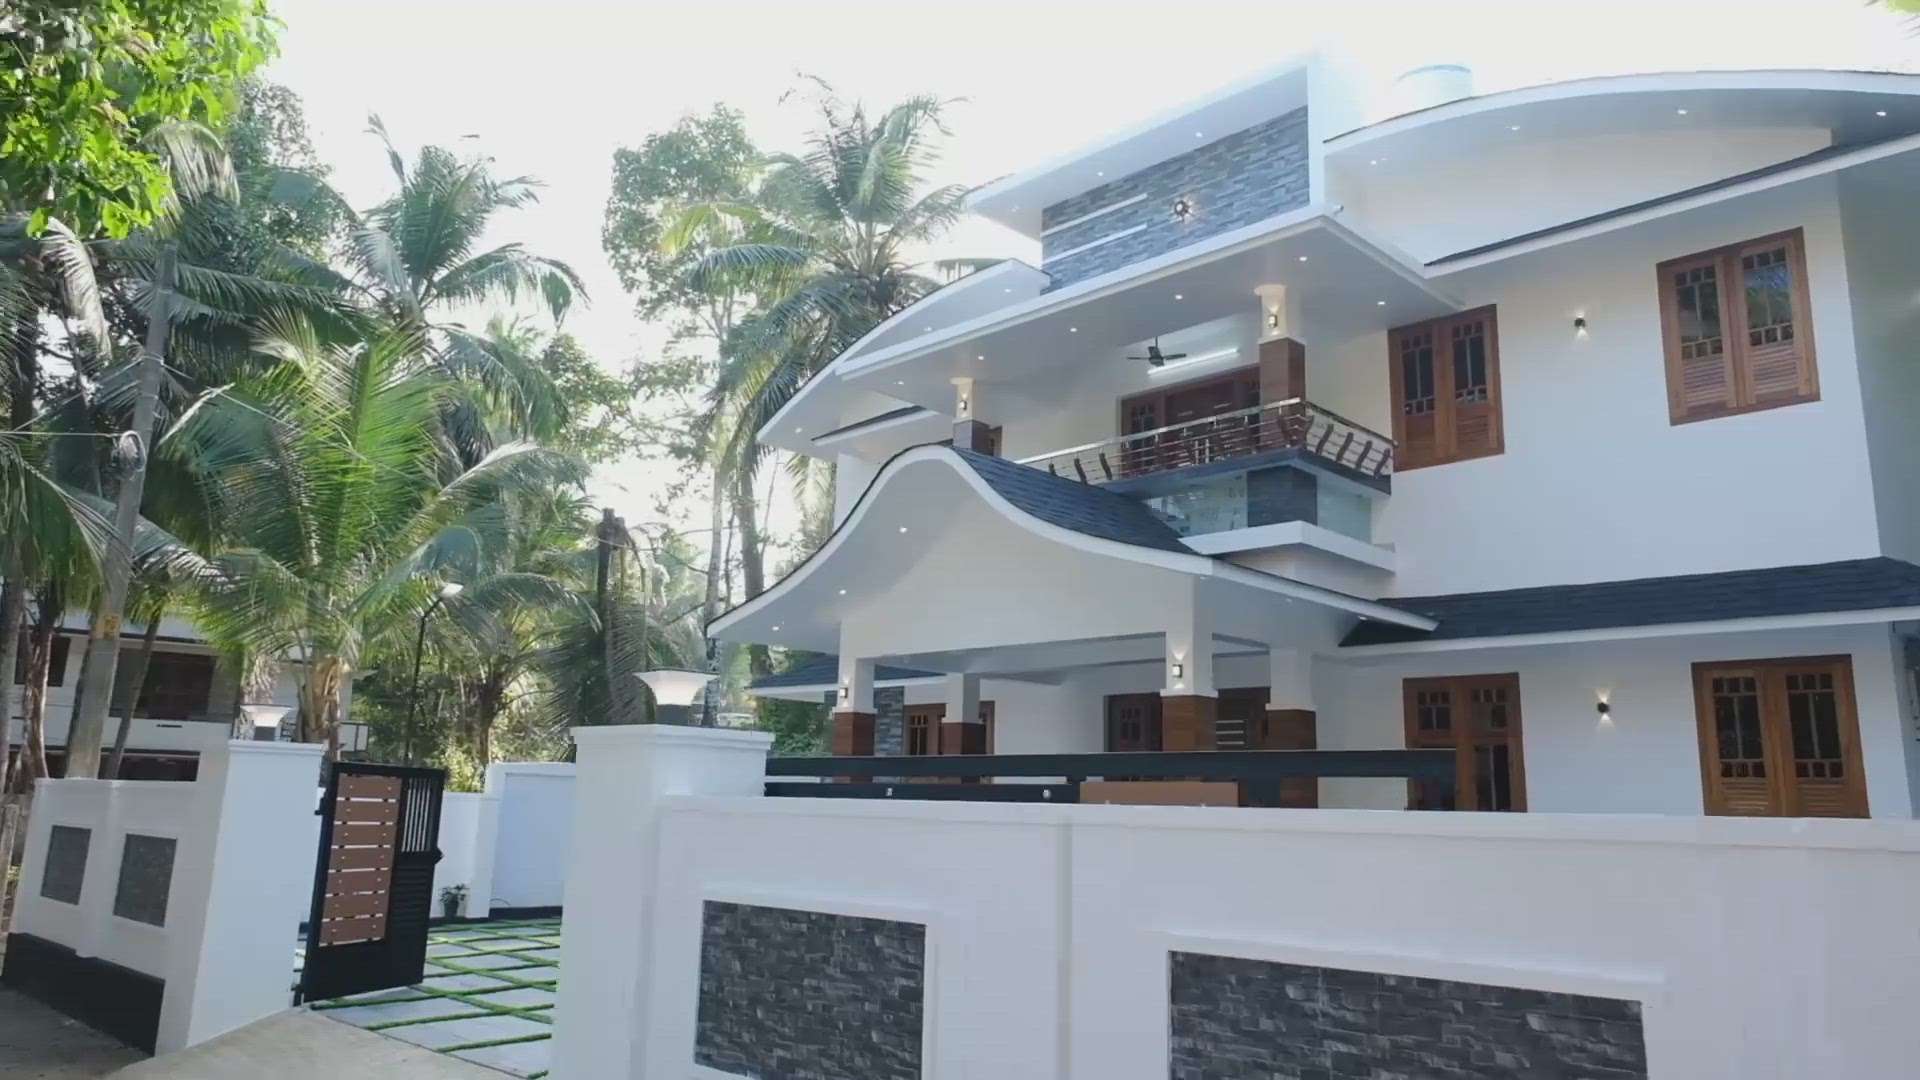 #KeralaStyleHouse #HouseDesigns 
recently completed project at Chavakkad.
2105 sqft
3bhk.